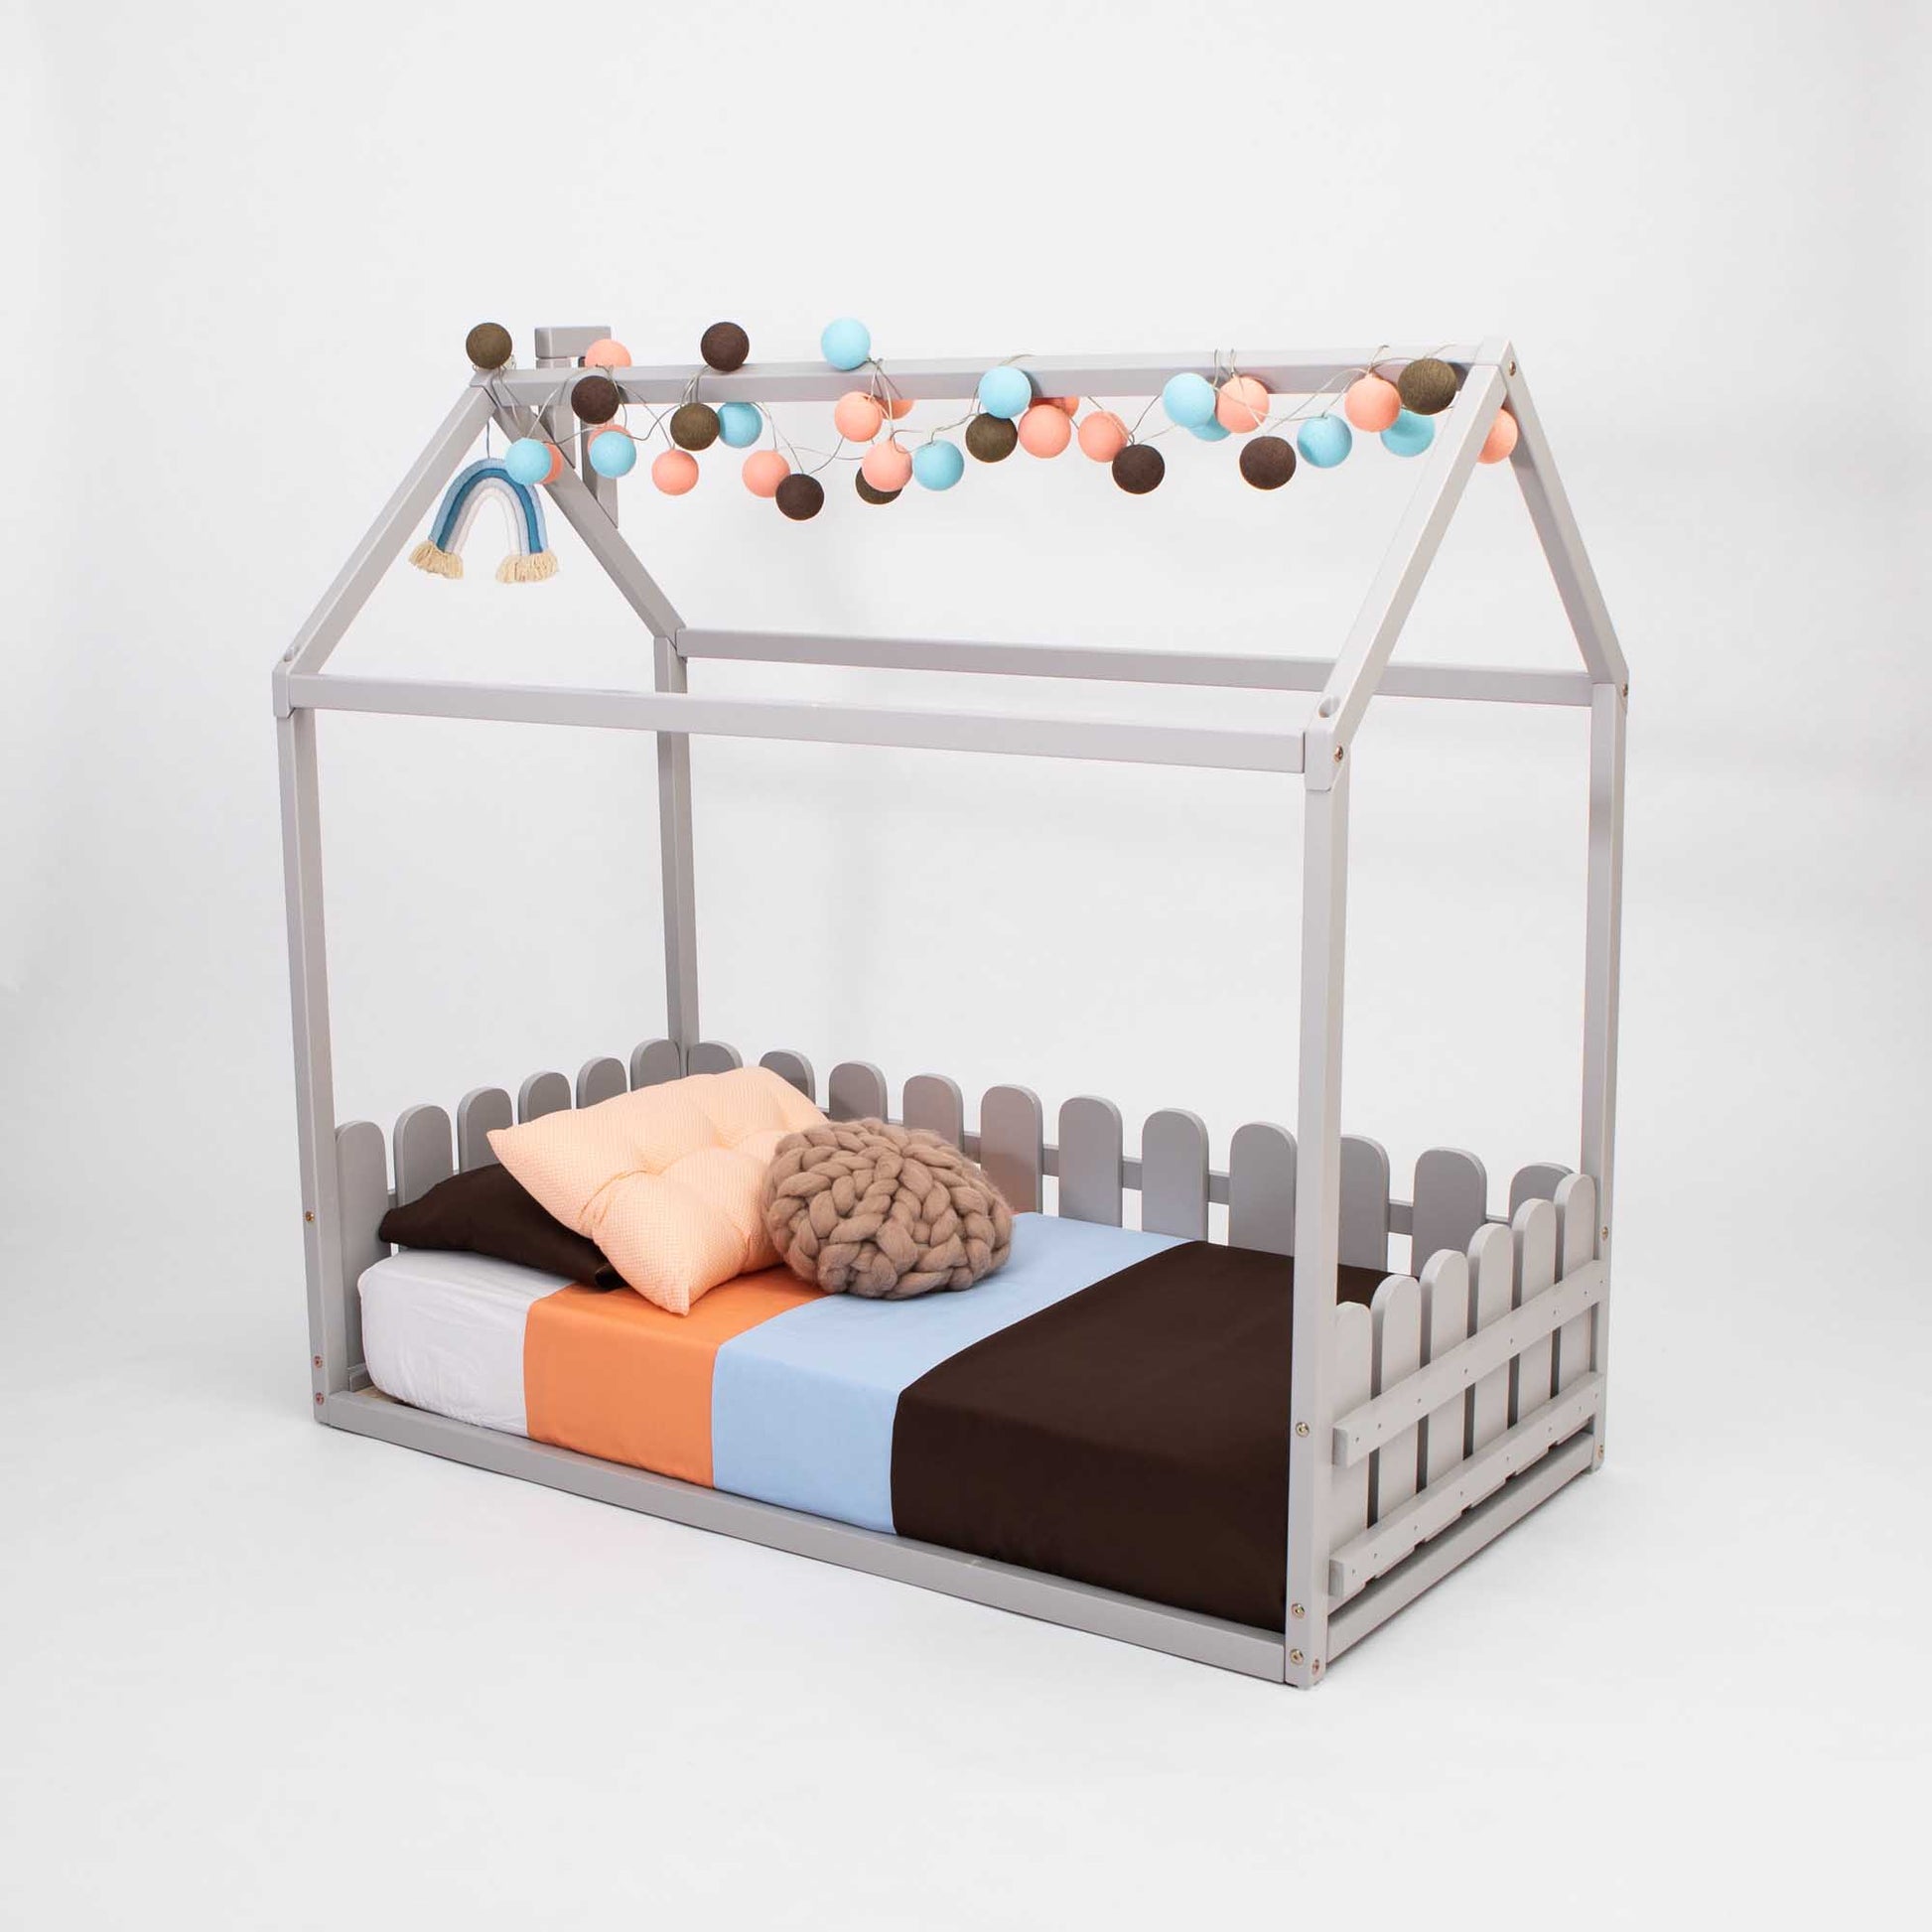 A low platform bed designed with a Floor house-frame bed with 3-sided picket fence rails for kids.